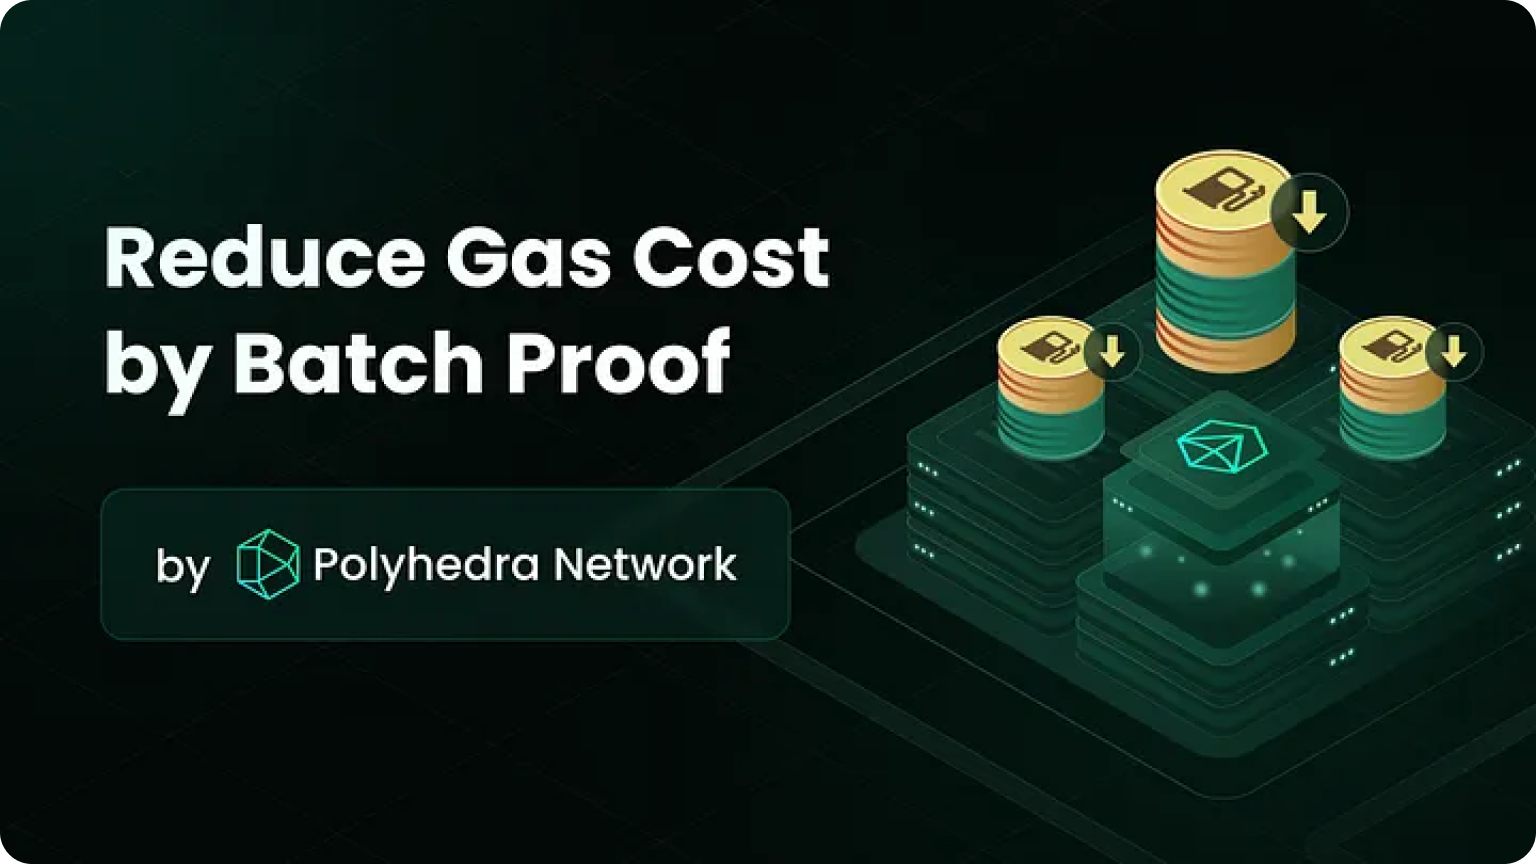 Reduce Gas Cost by Batch Proof